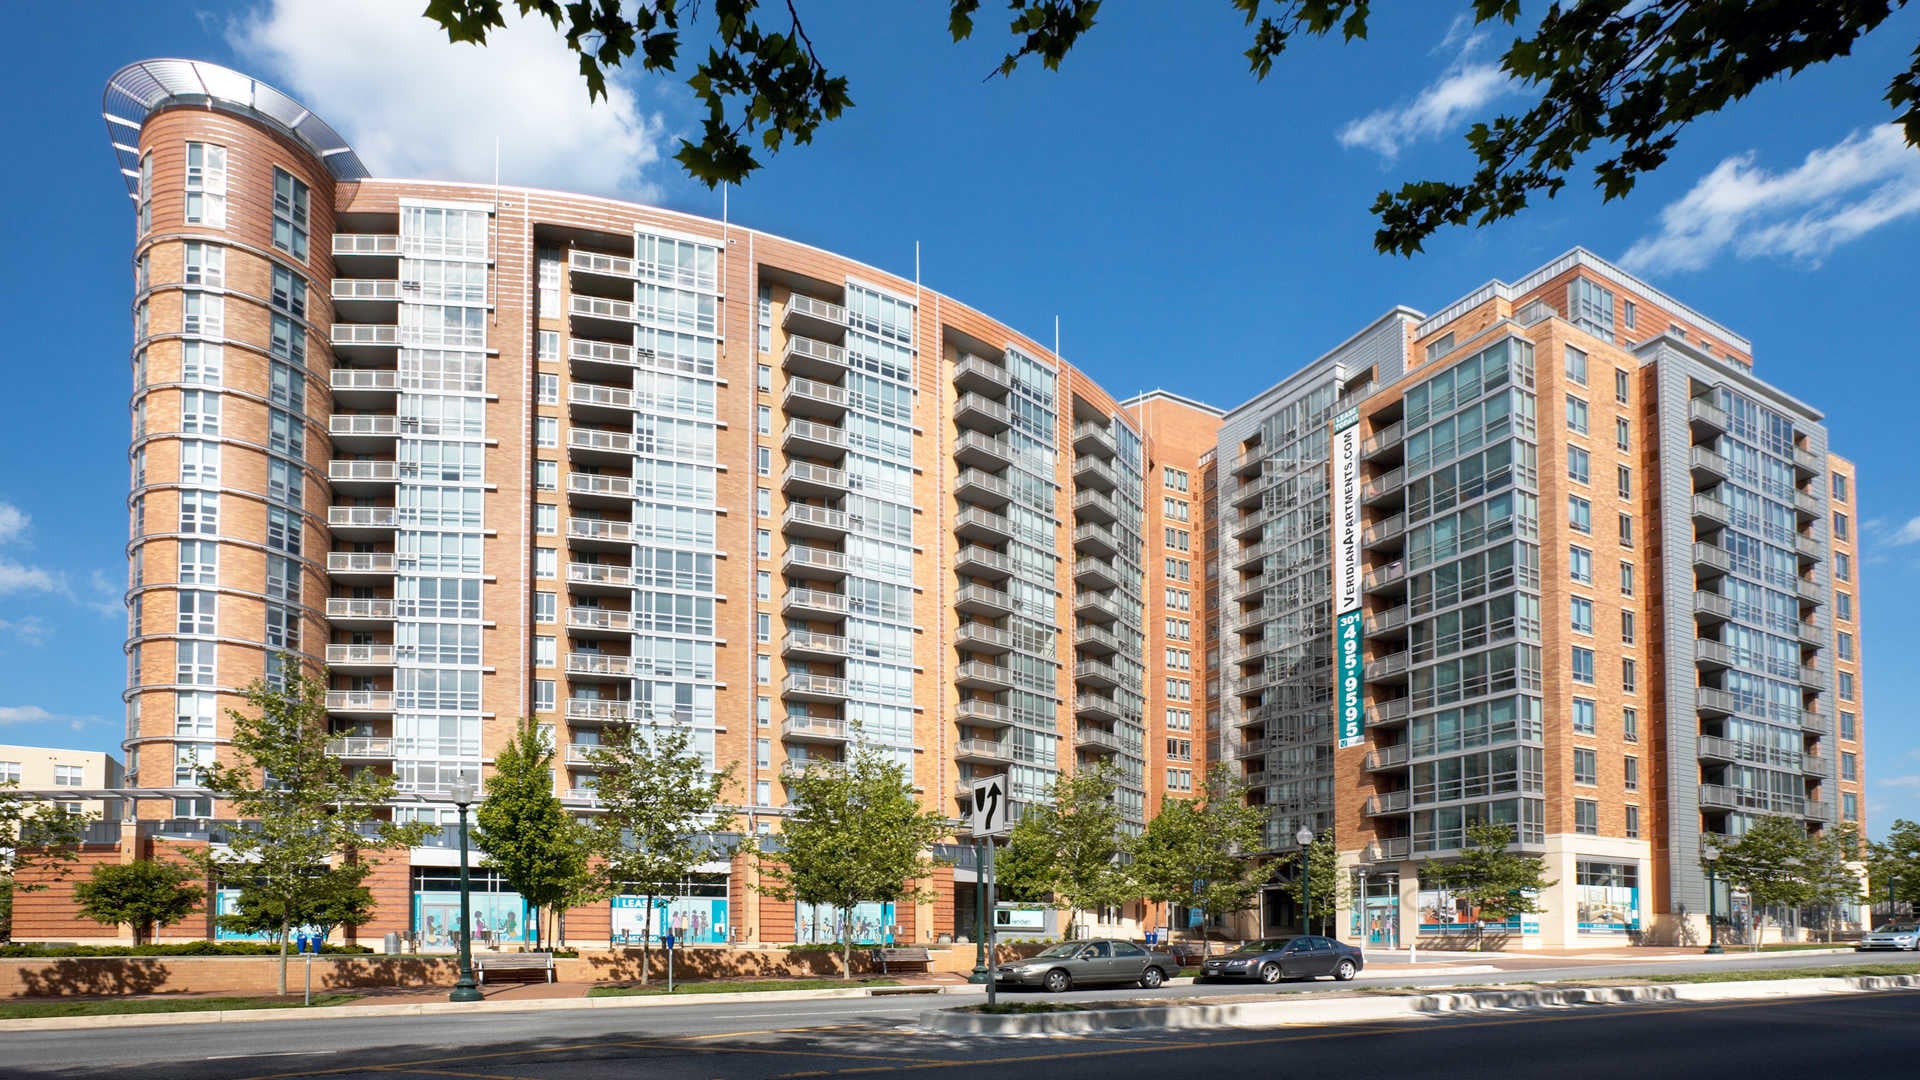 20 Best Luxury Apartments In Silver Spring, MD (with pics)!